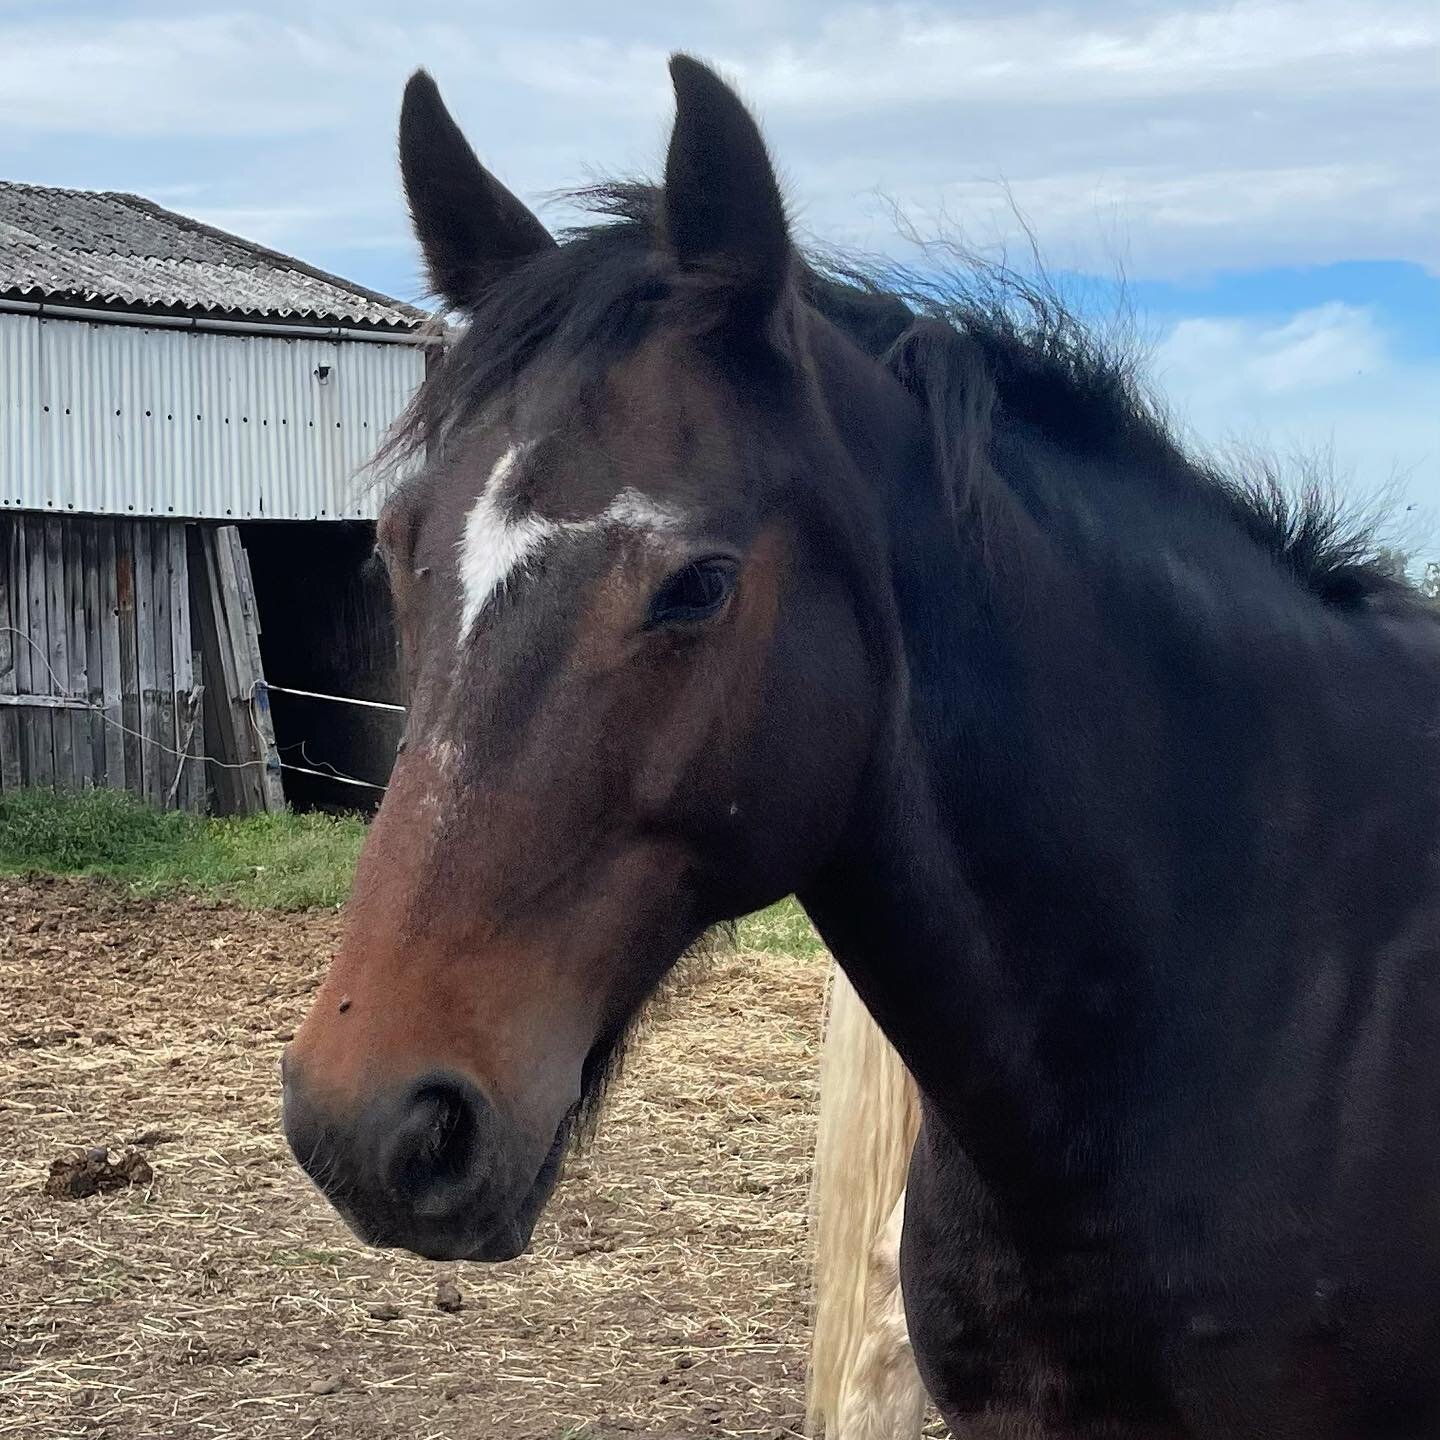 ⭐️ 𝐈𝐧𝐭𝐫𝐨𝐝𝐮𝐜𝐢𝐧𝐠 . . . Danny! A proper lovely horse and a cute sensitive soul! Loves a good jump and enjoys a bit of fun and games! ⭐️ #pony#riding#horse#horse-riding#ukridingschool#britishridingschool#ridinglesson#ponies#birtlesequestrian#r